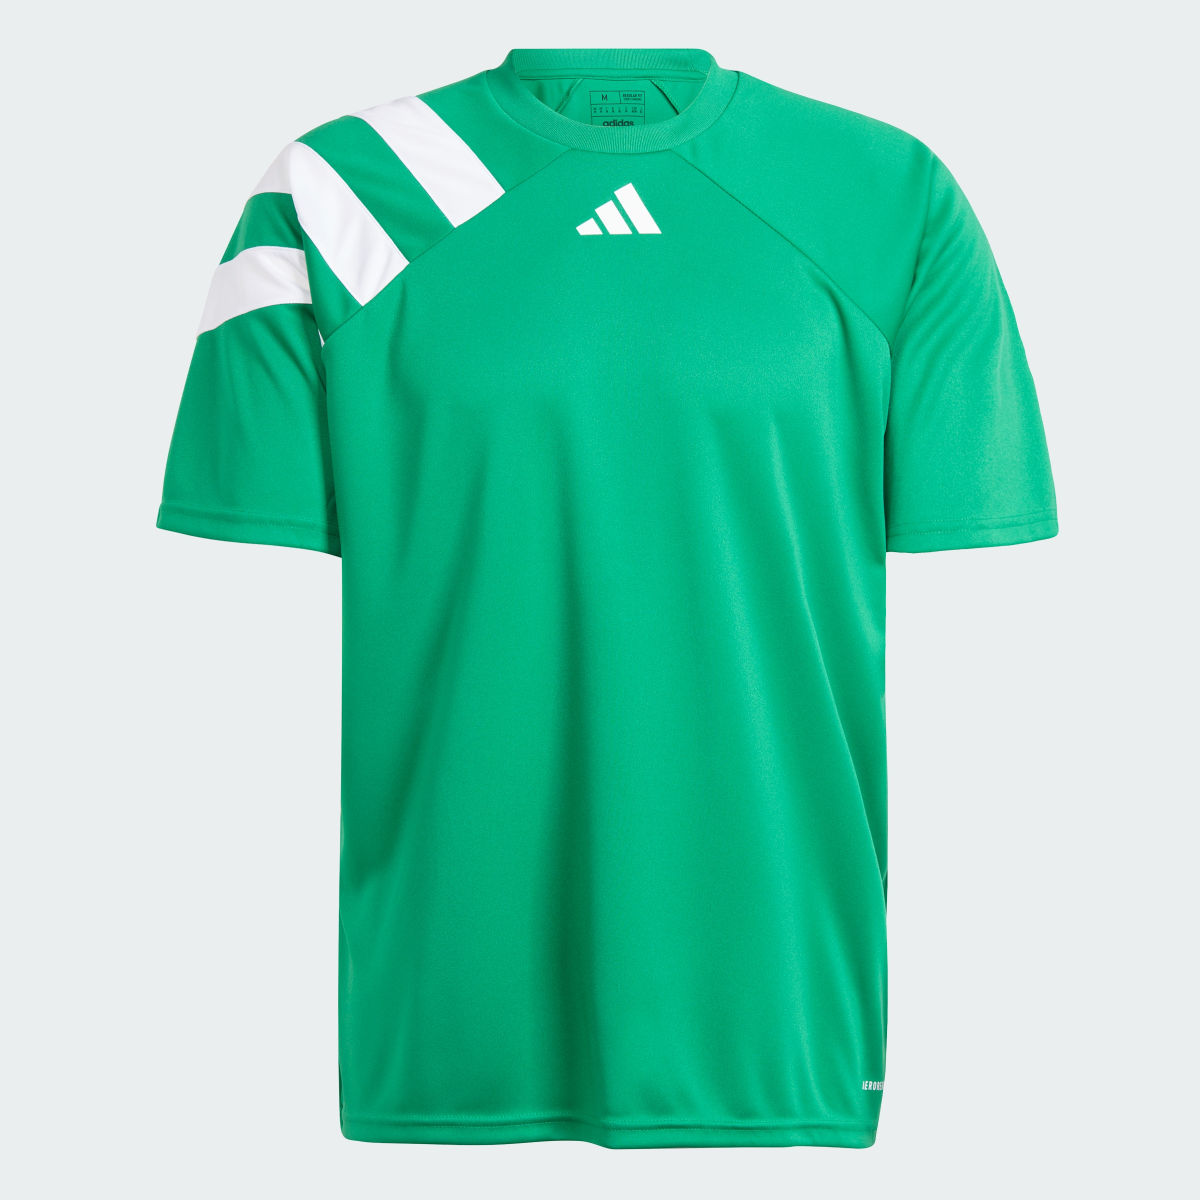 Adidas Maillot Fortore 23. 5